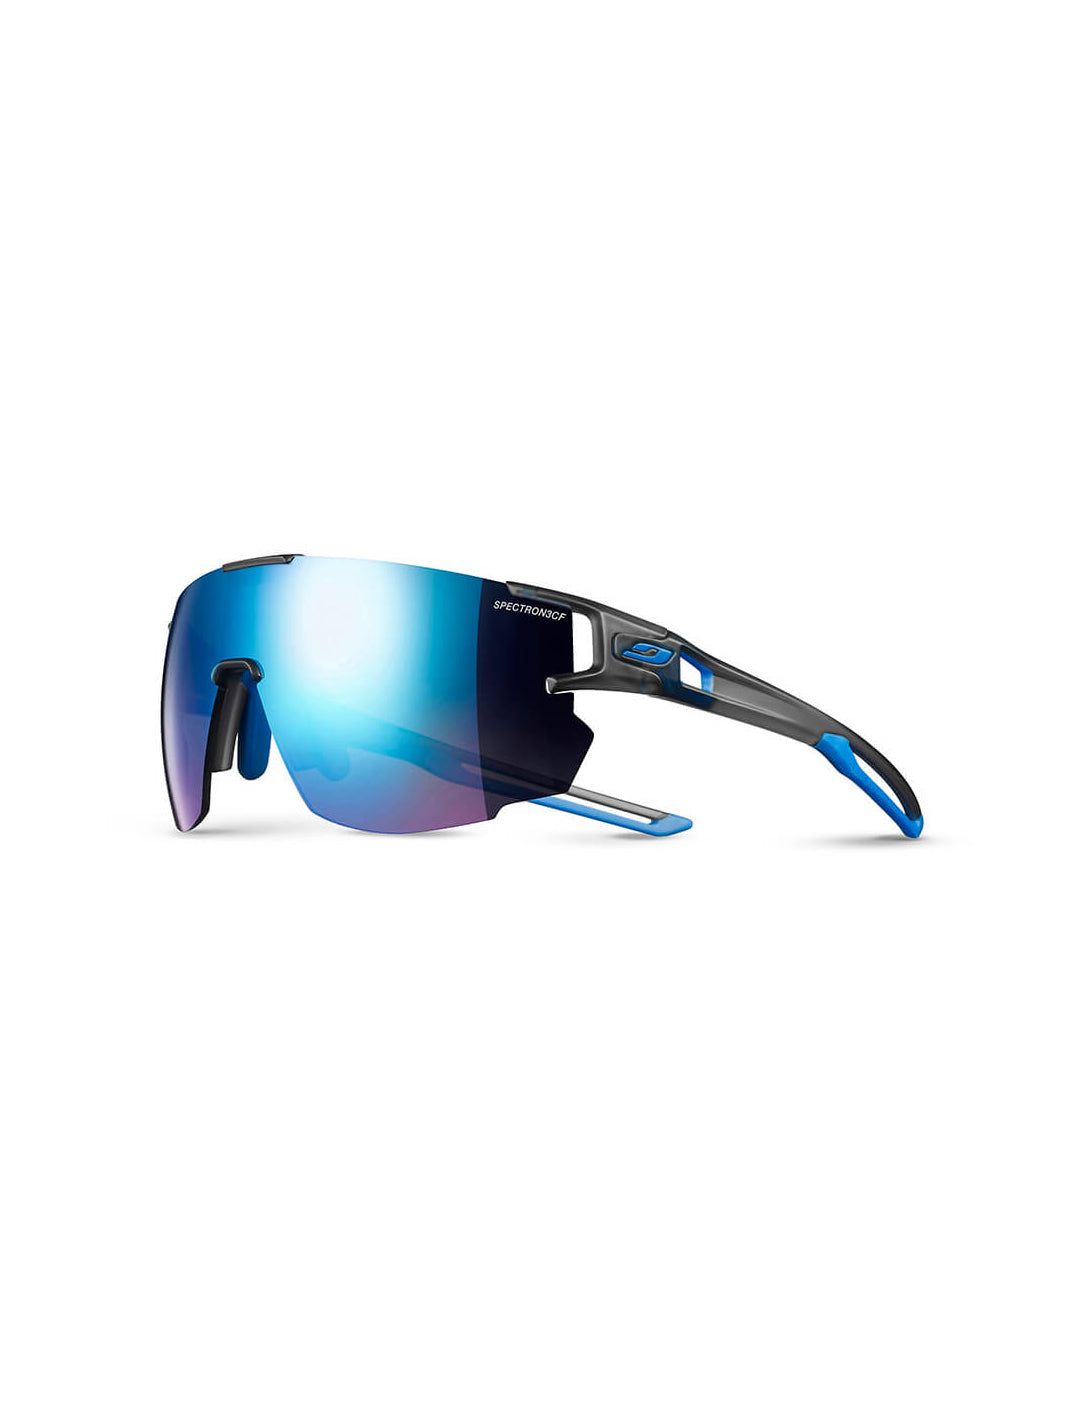 New Cycling Glasses Bicycle Men Women Outdoor Sports